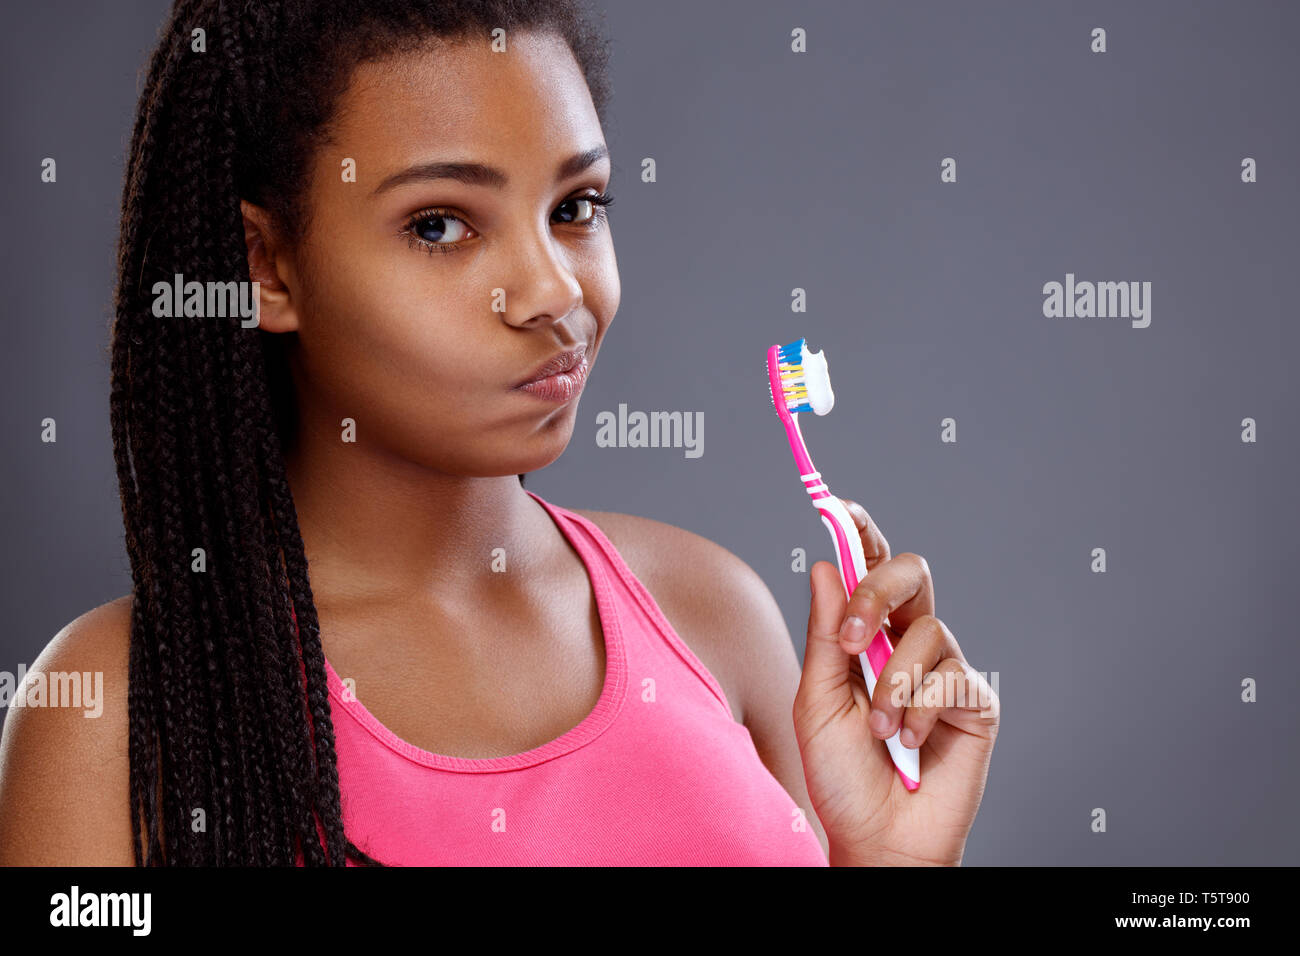 Portrait of a smiling cute woman holding toothbrush Stock Photo. 